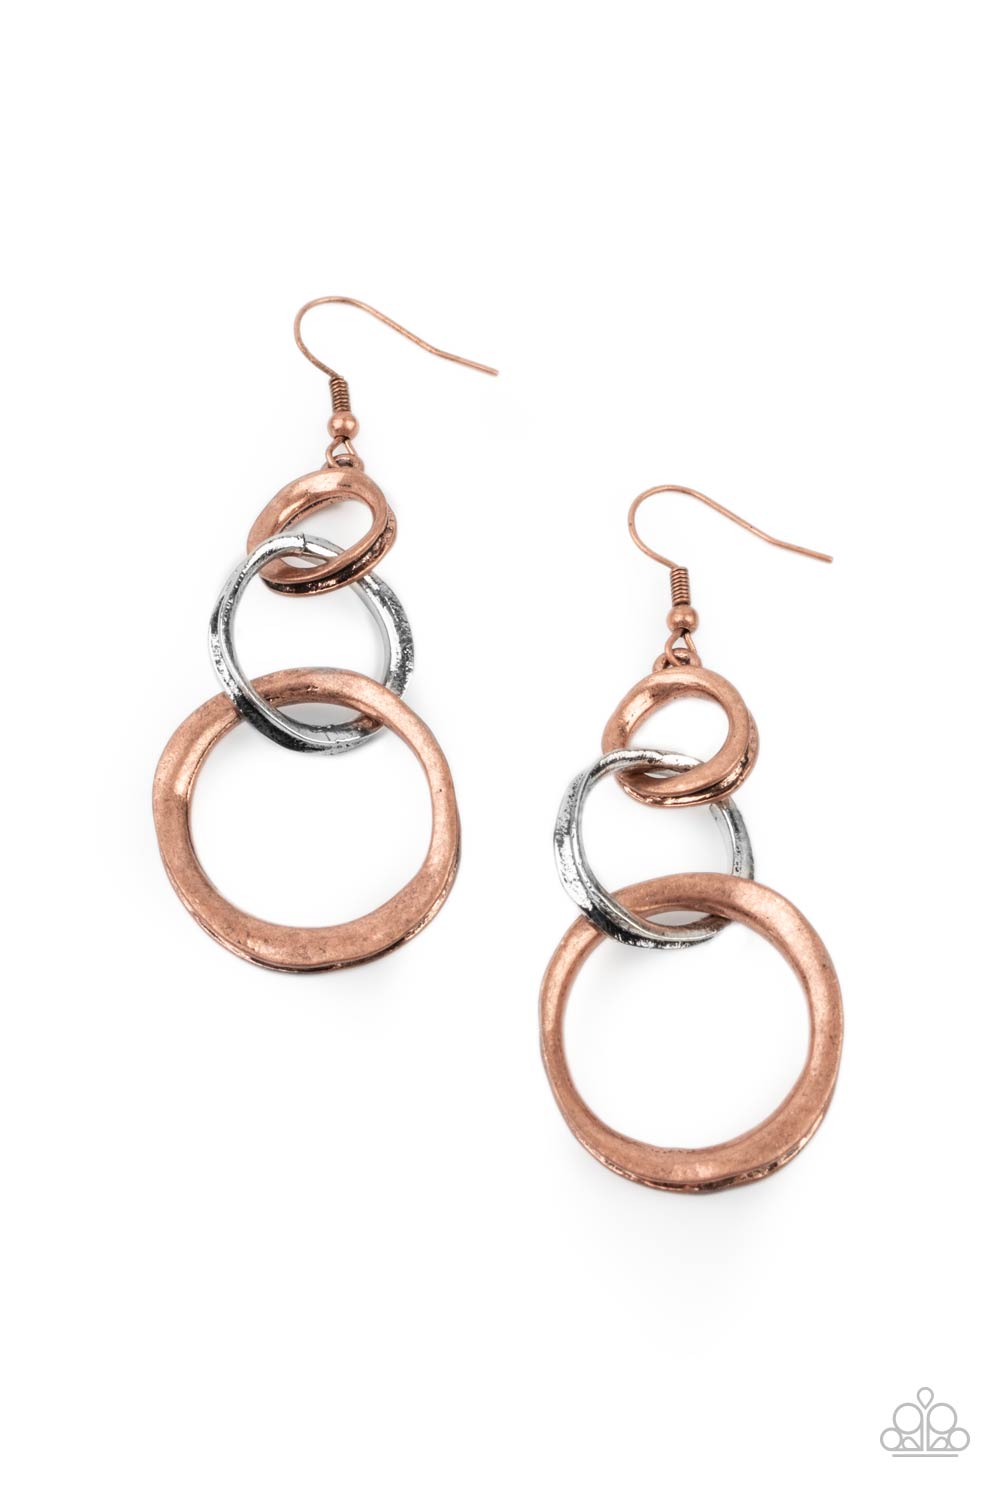 Paparazzi - Harmoniously Handcrafted - Copper Earrings - Alies Bling Bar